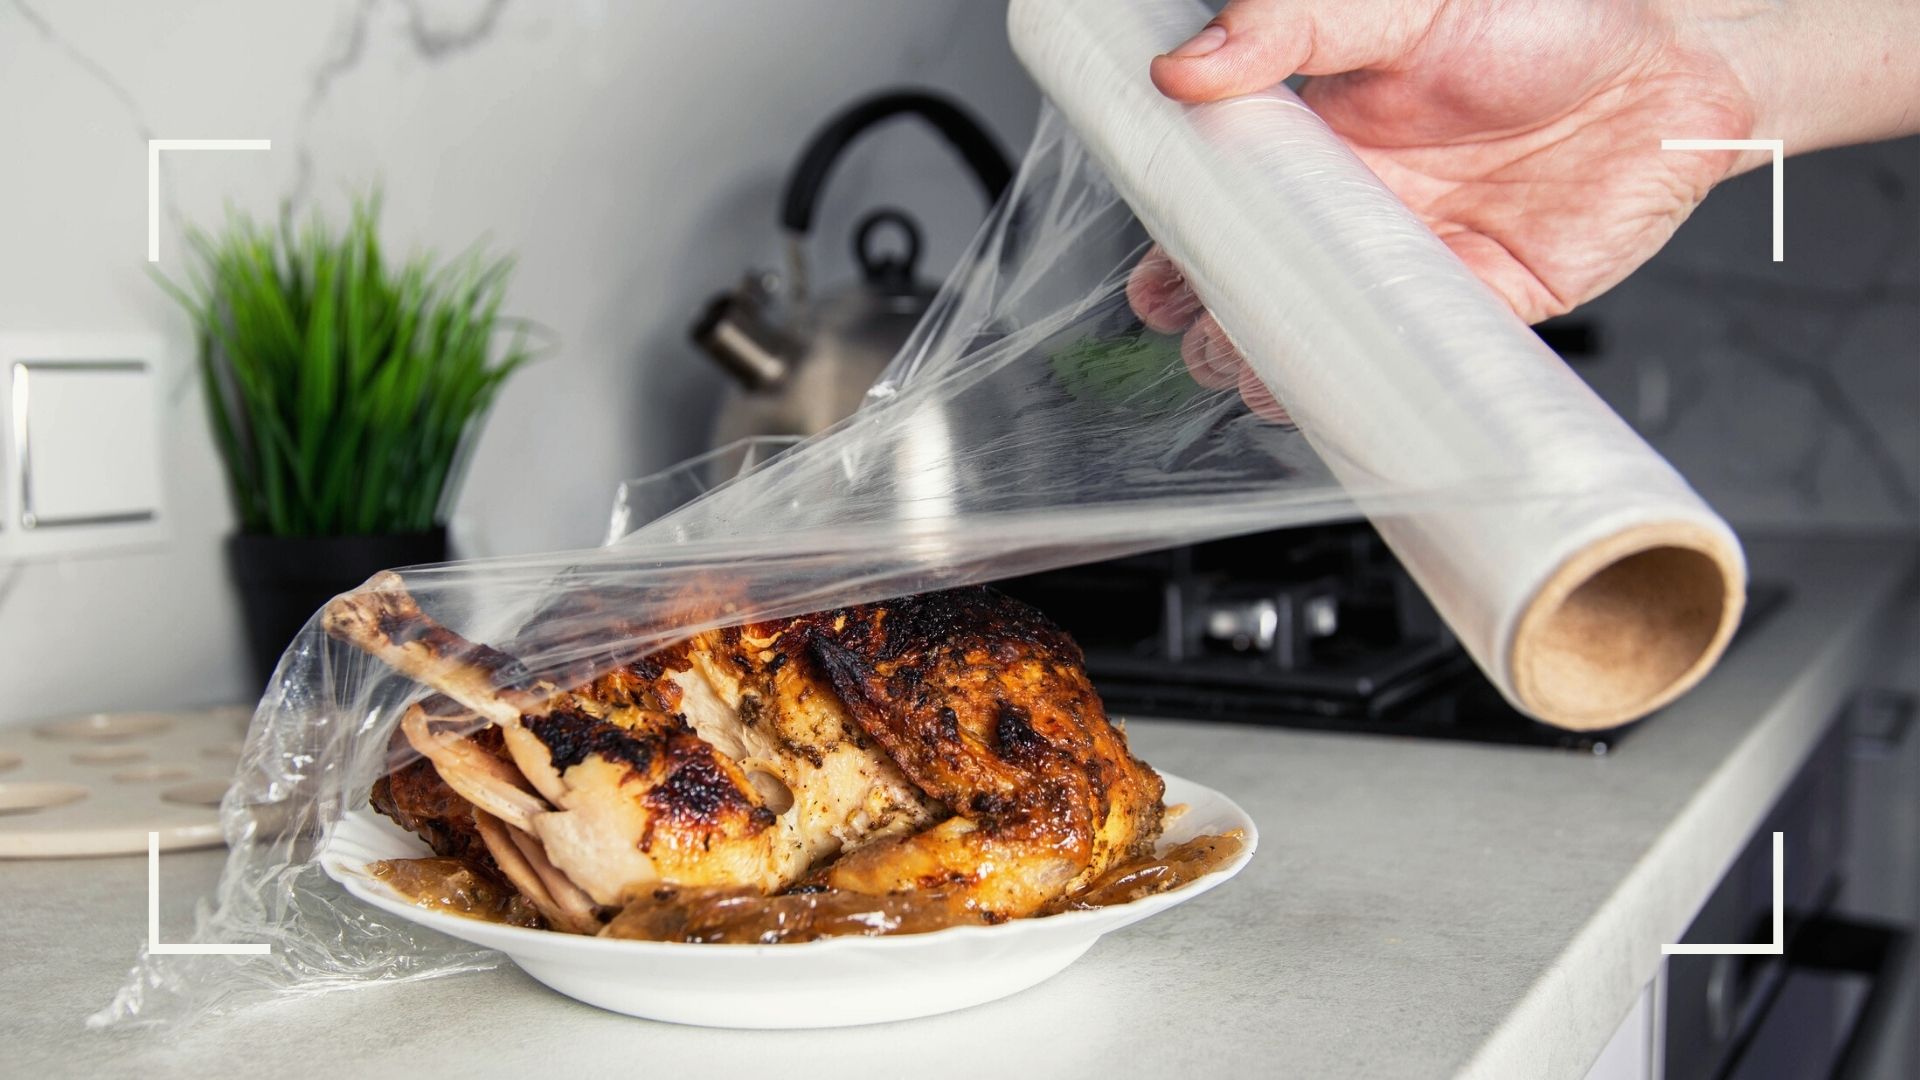 How long does cooked chicken last in the fridge? Safety tips to know.